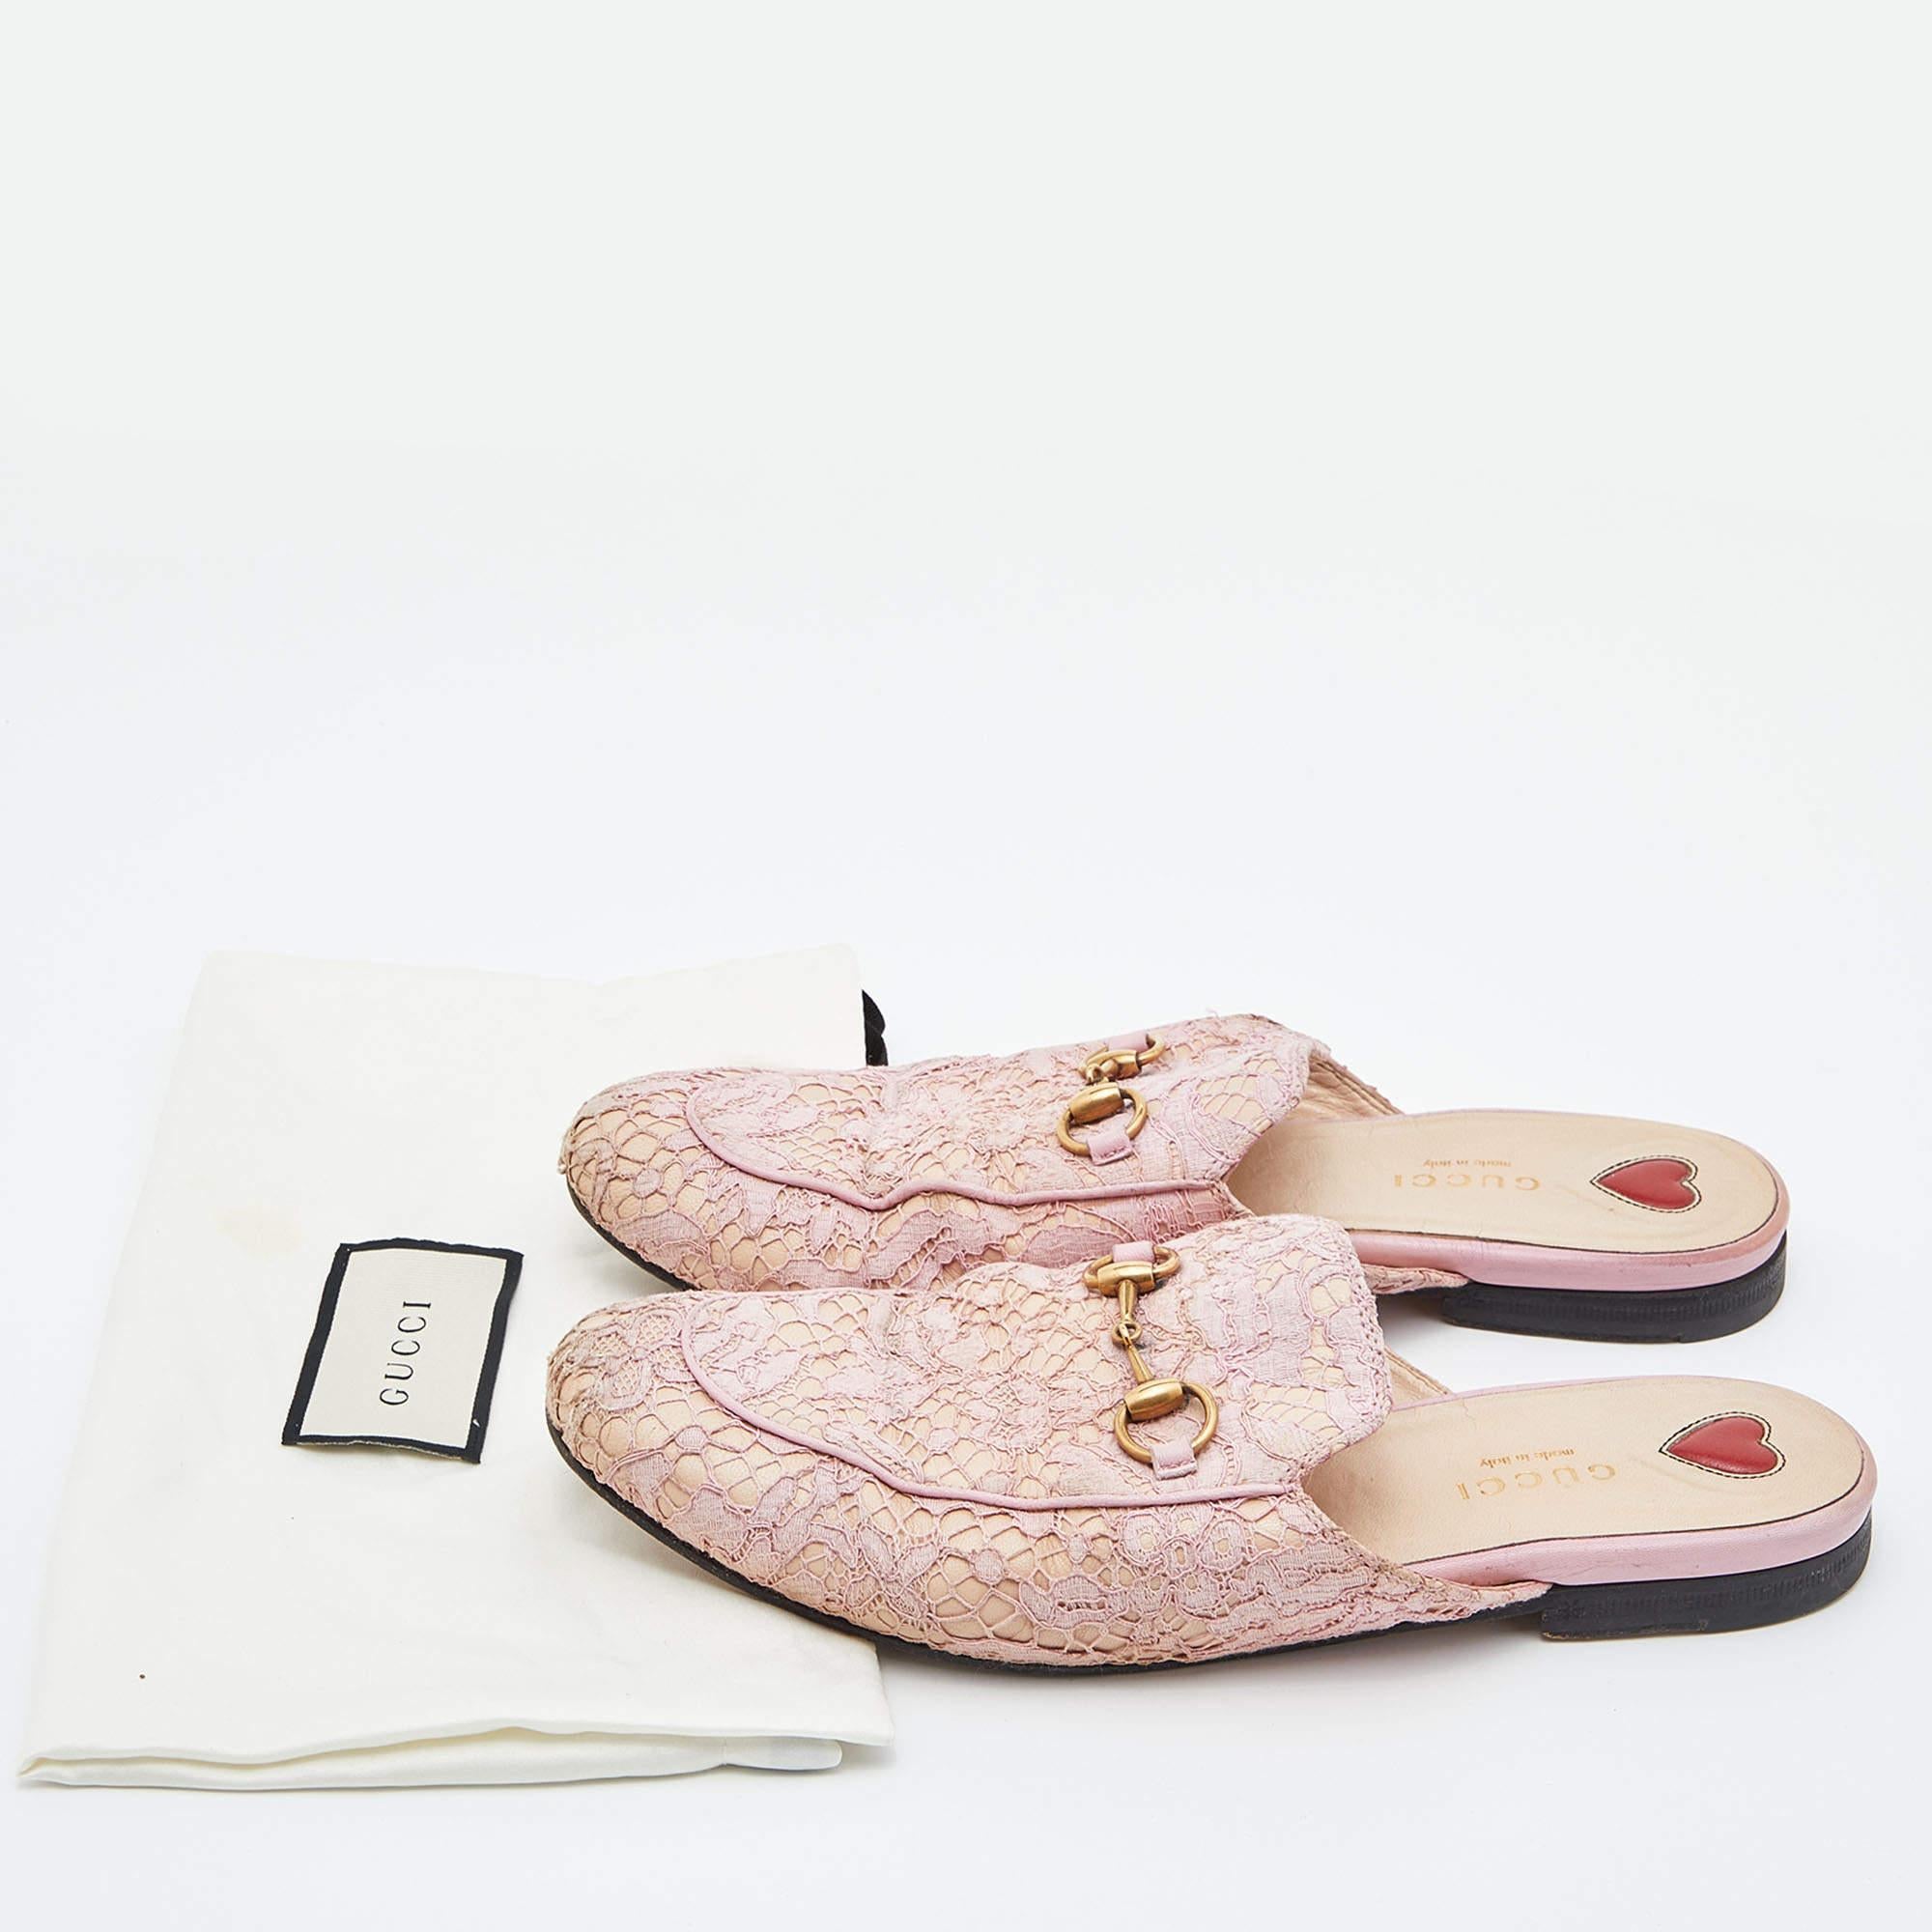 Gucci Pink Floral Lace and Leather Princetown Flat Mule Size 37.5 For Sale 2